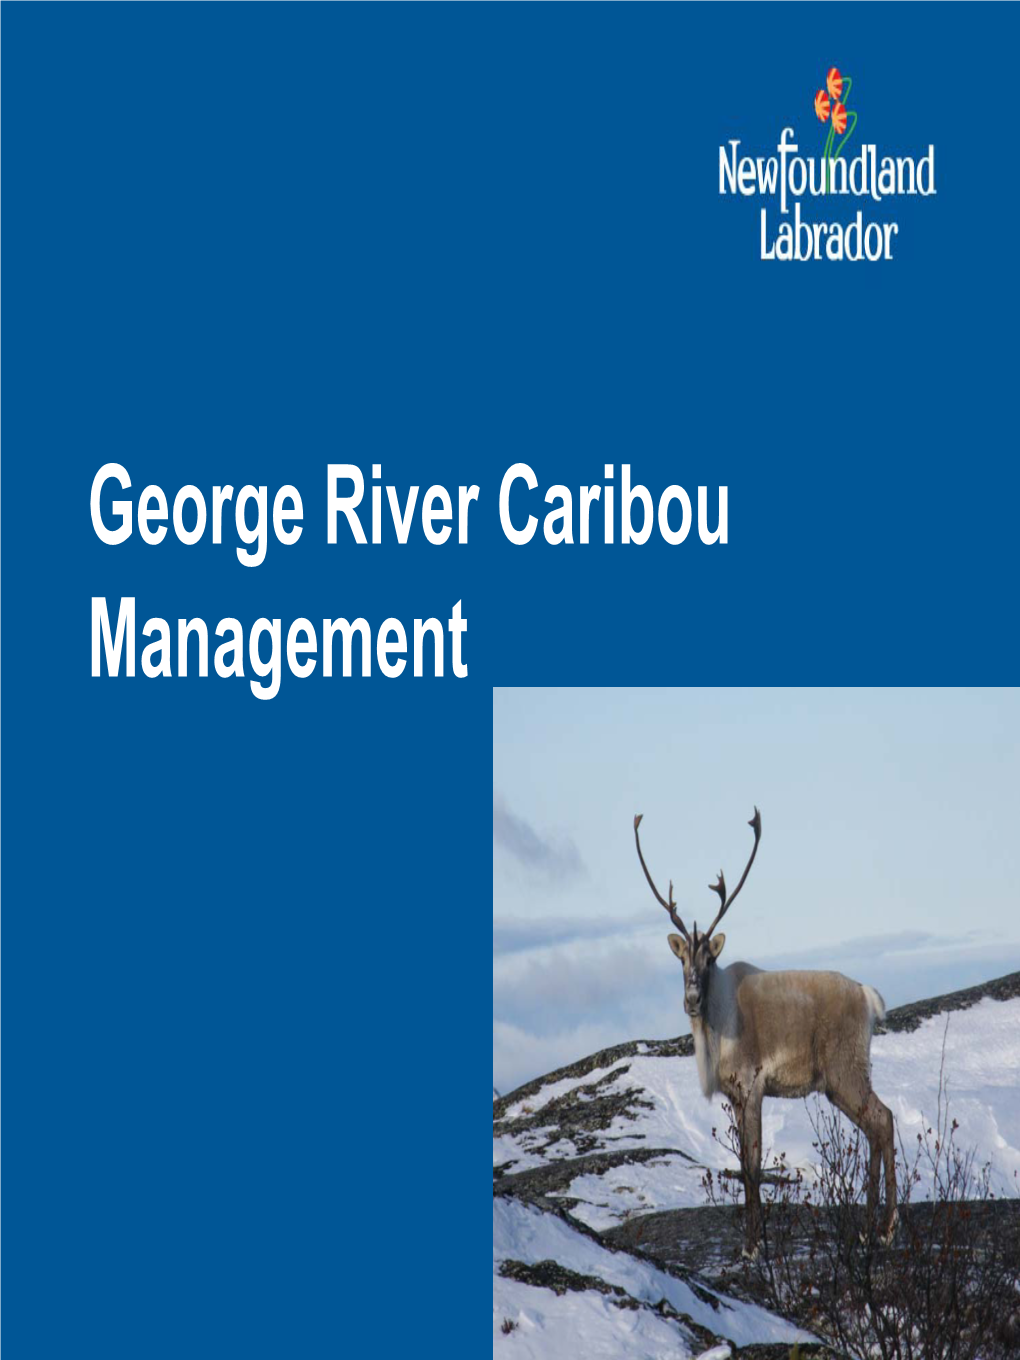 George River Caribou Management Why Are We Consulting?